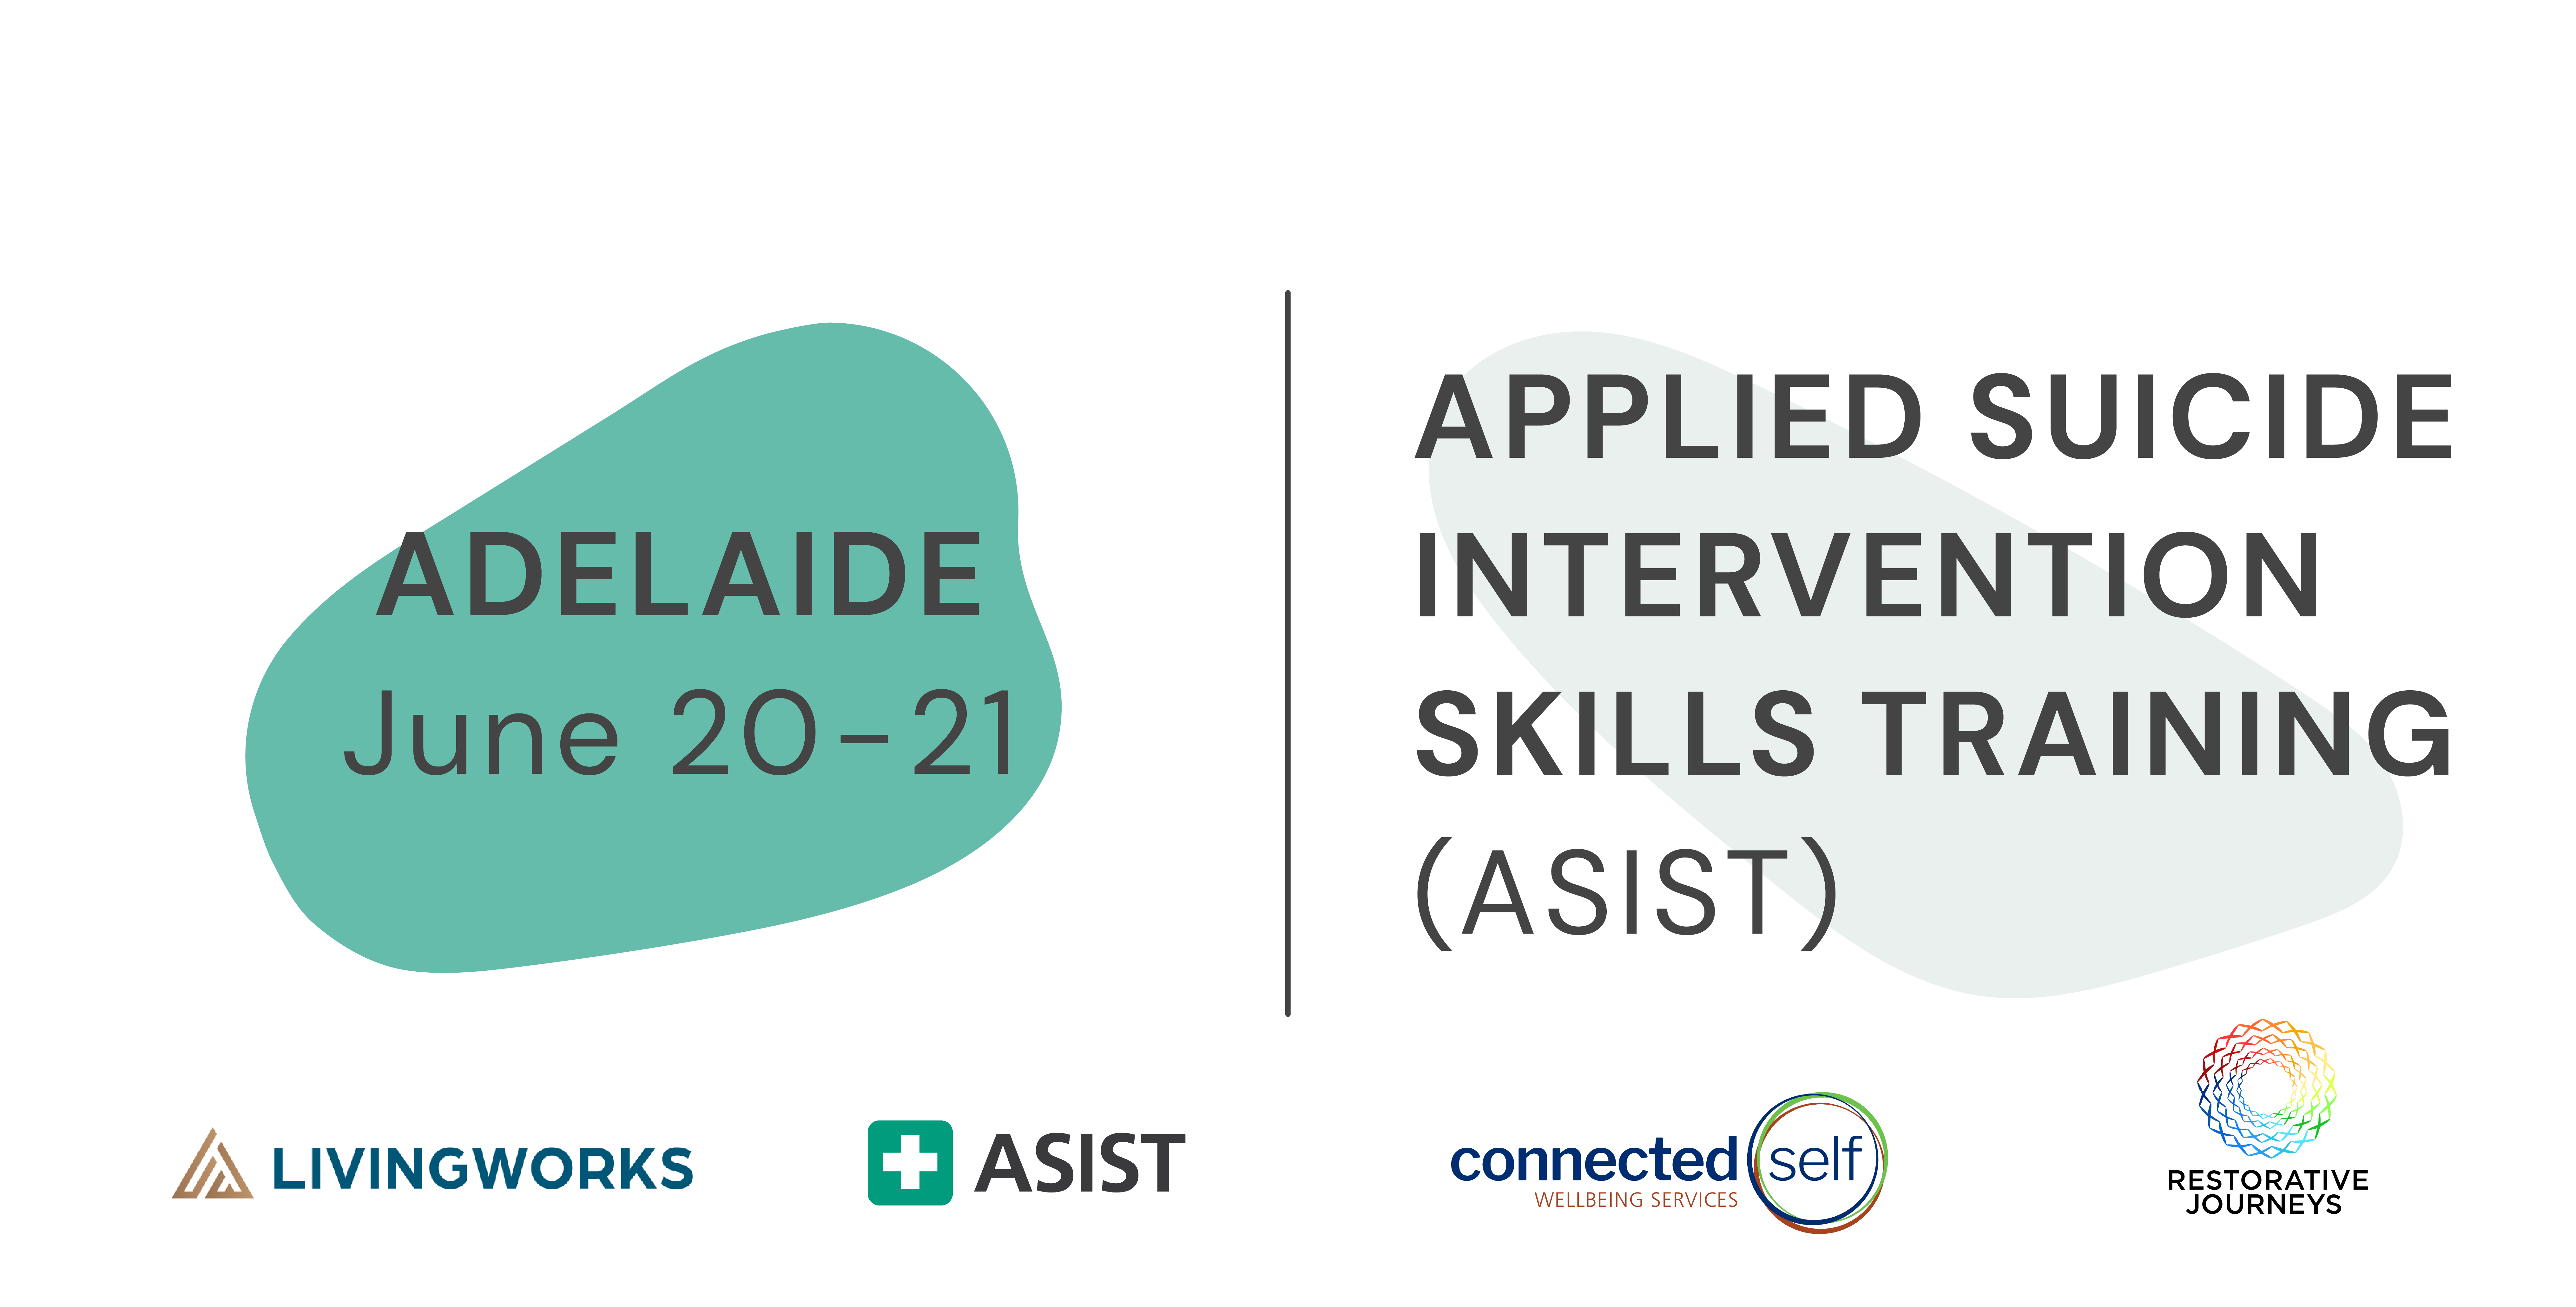 ADELAIDE | Applied Suicide Intervention Skills Training (ASIST)